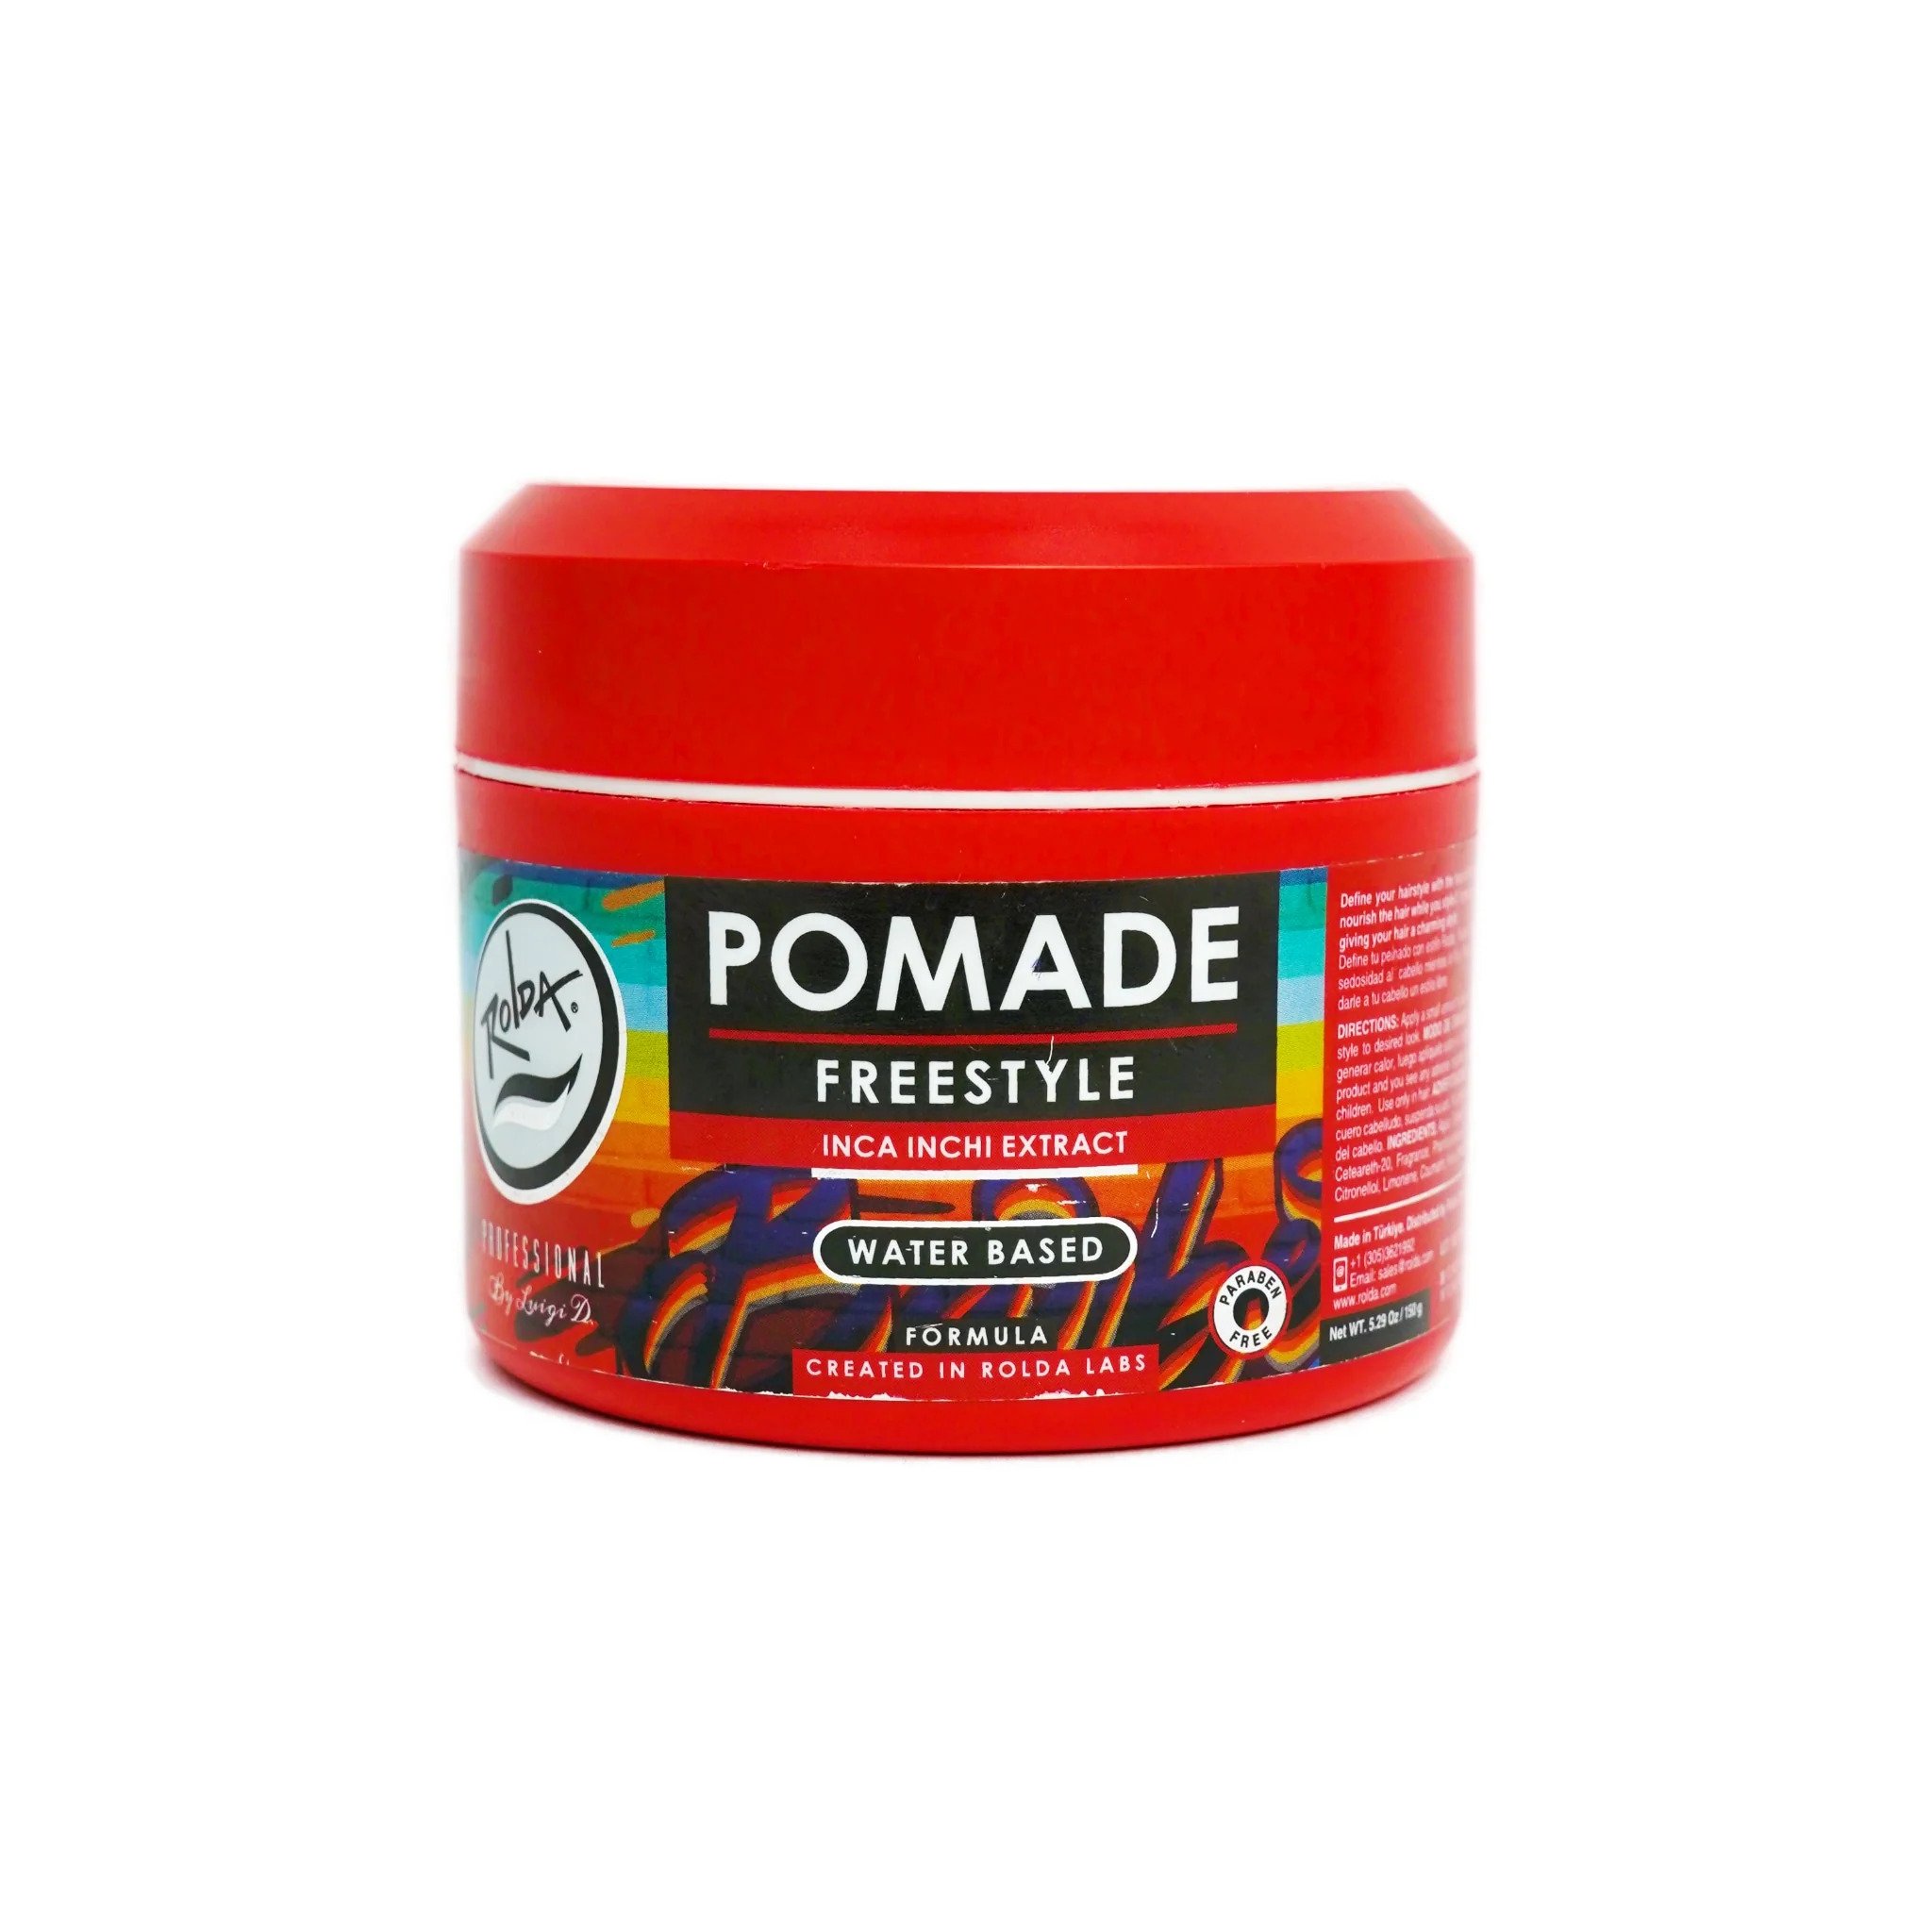 Free Style Hair Pomade with Inca Inchi Extract - Versatile and Long-Lasting Hairstyling Solution